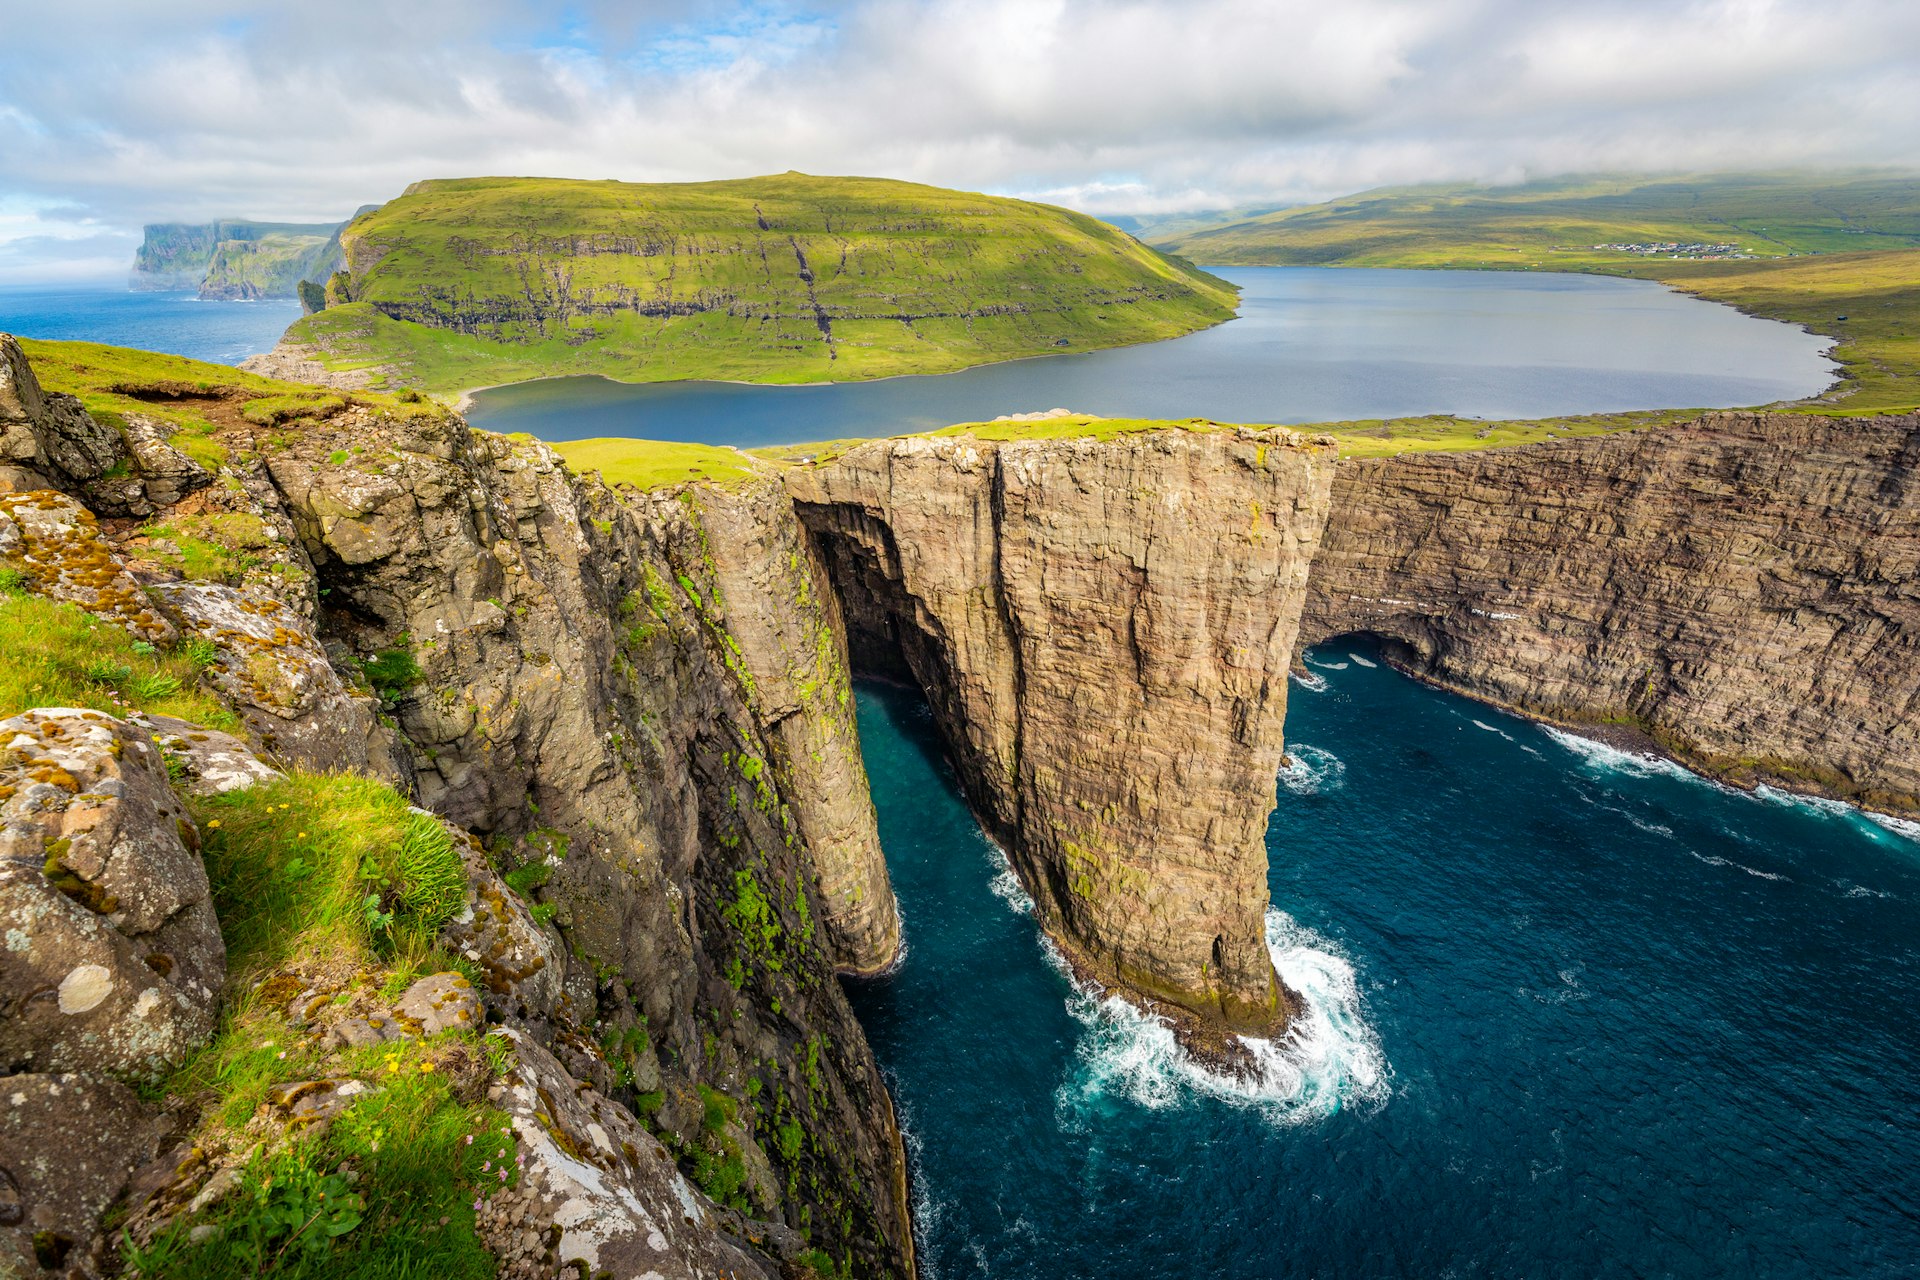 A cliff top lake appears to float above the land and ocean below